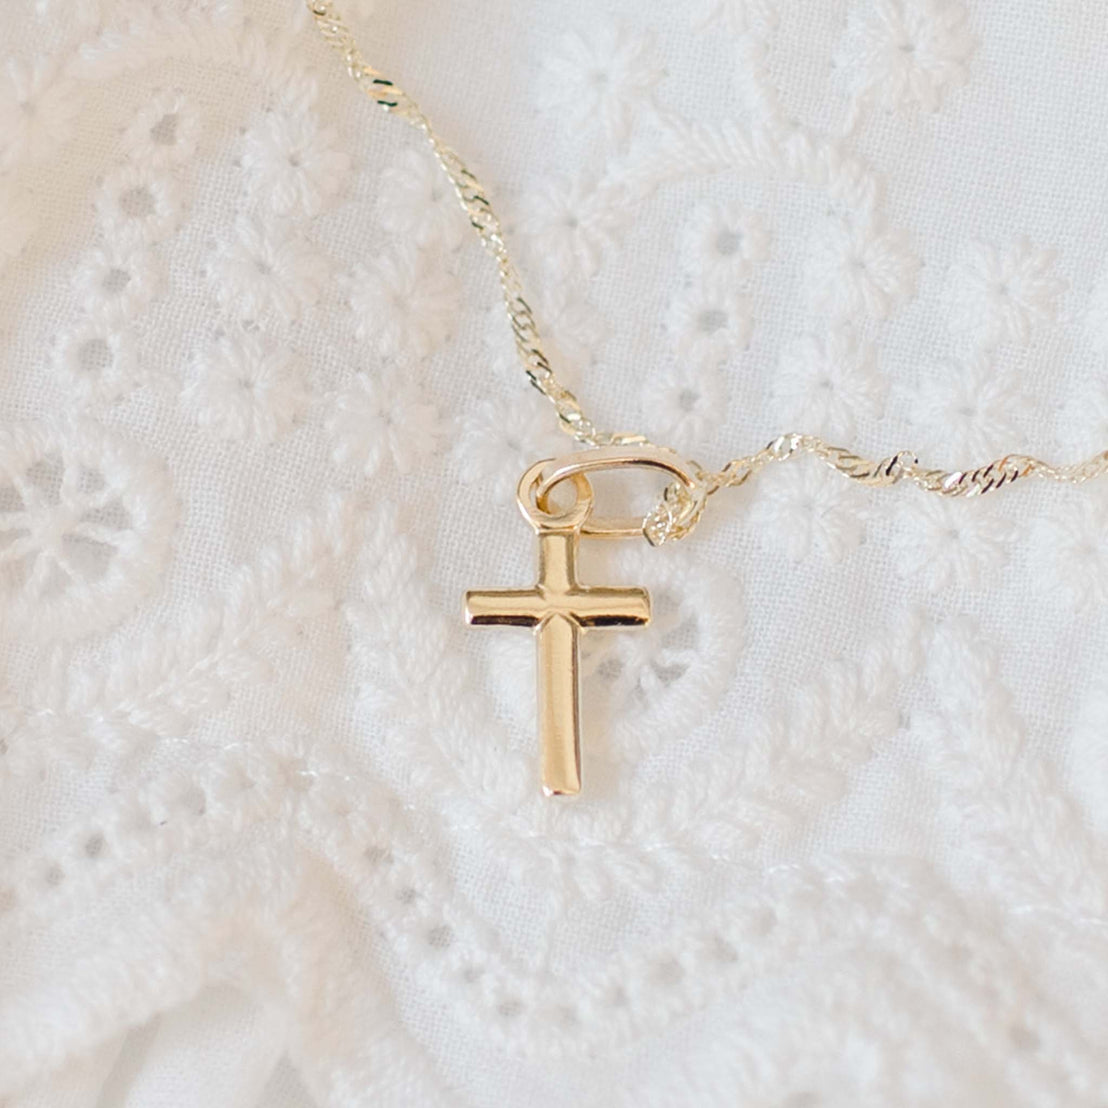 Tiny gold cross charm on chain with lace